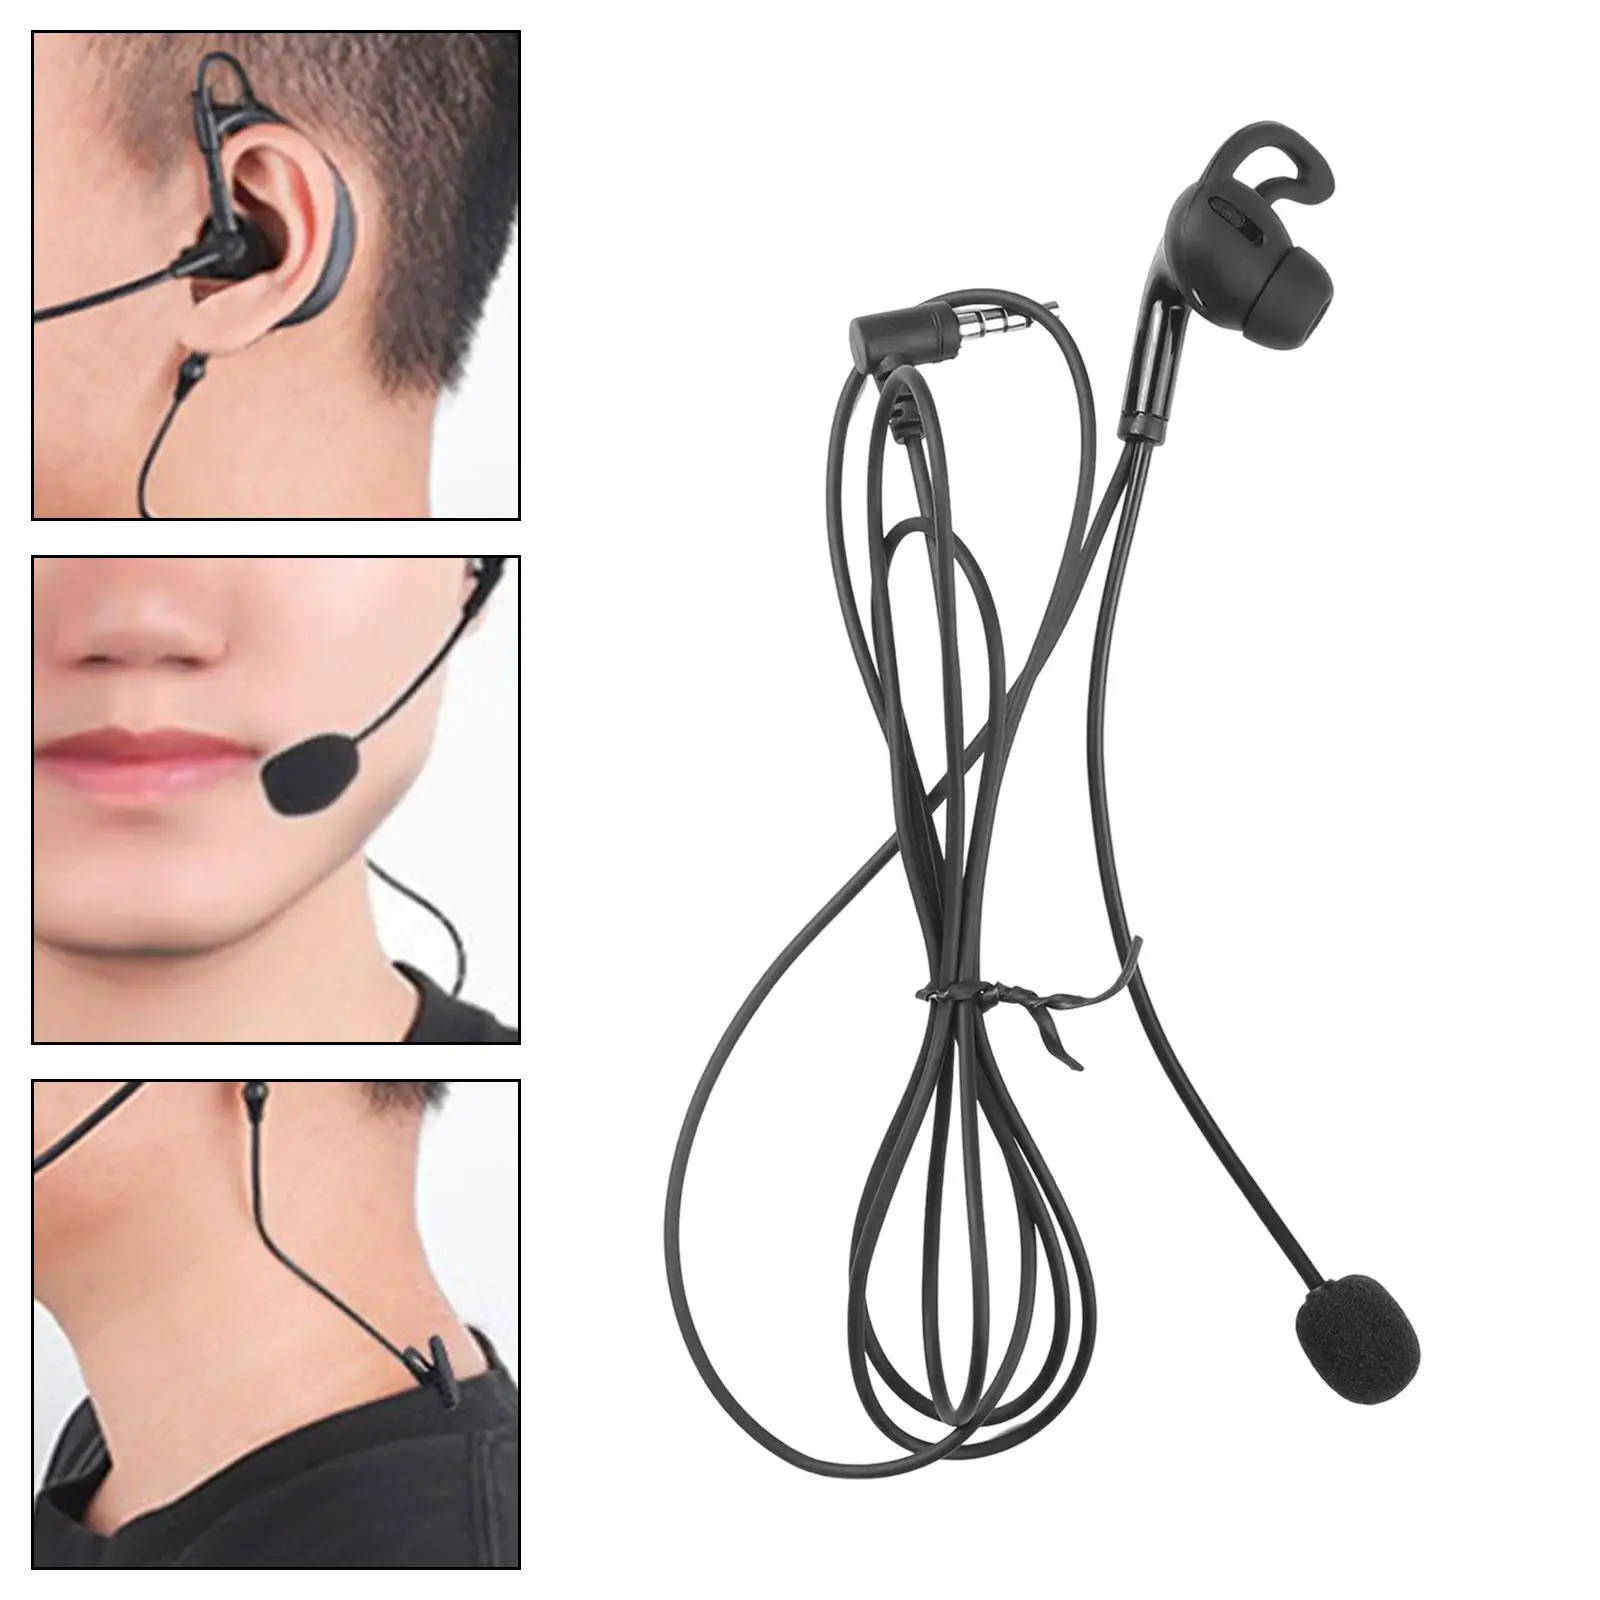 Referee Single Ear Earphone Wired Ear Mic Professional Wired Headphones Remote Portable In-Ear USB Headset for Laptop PC Sports